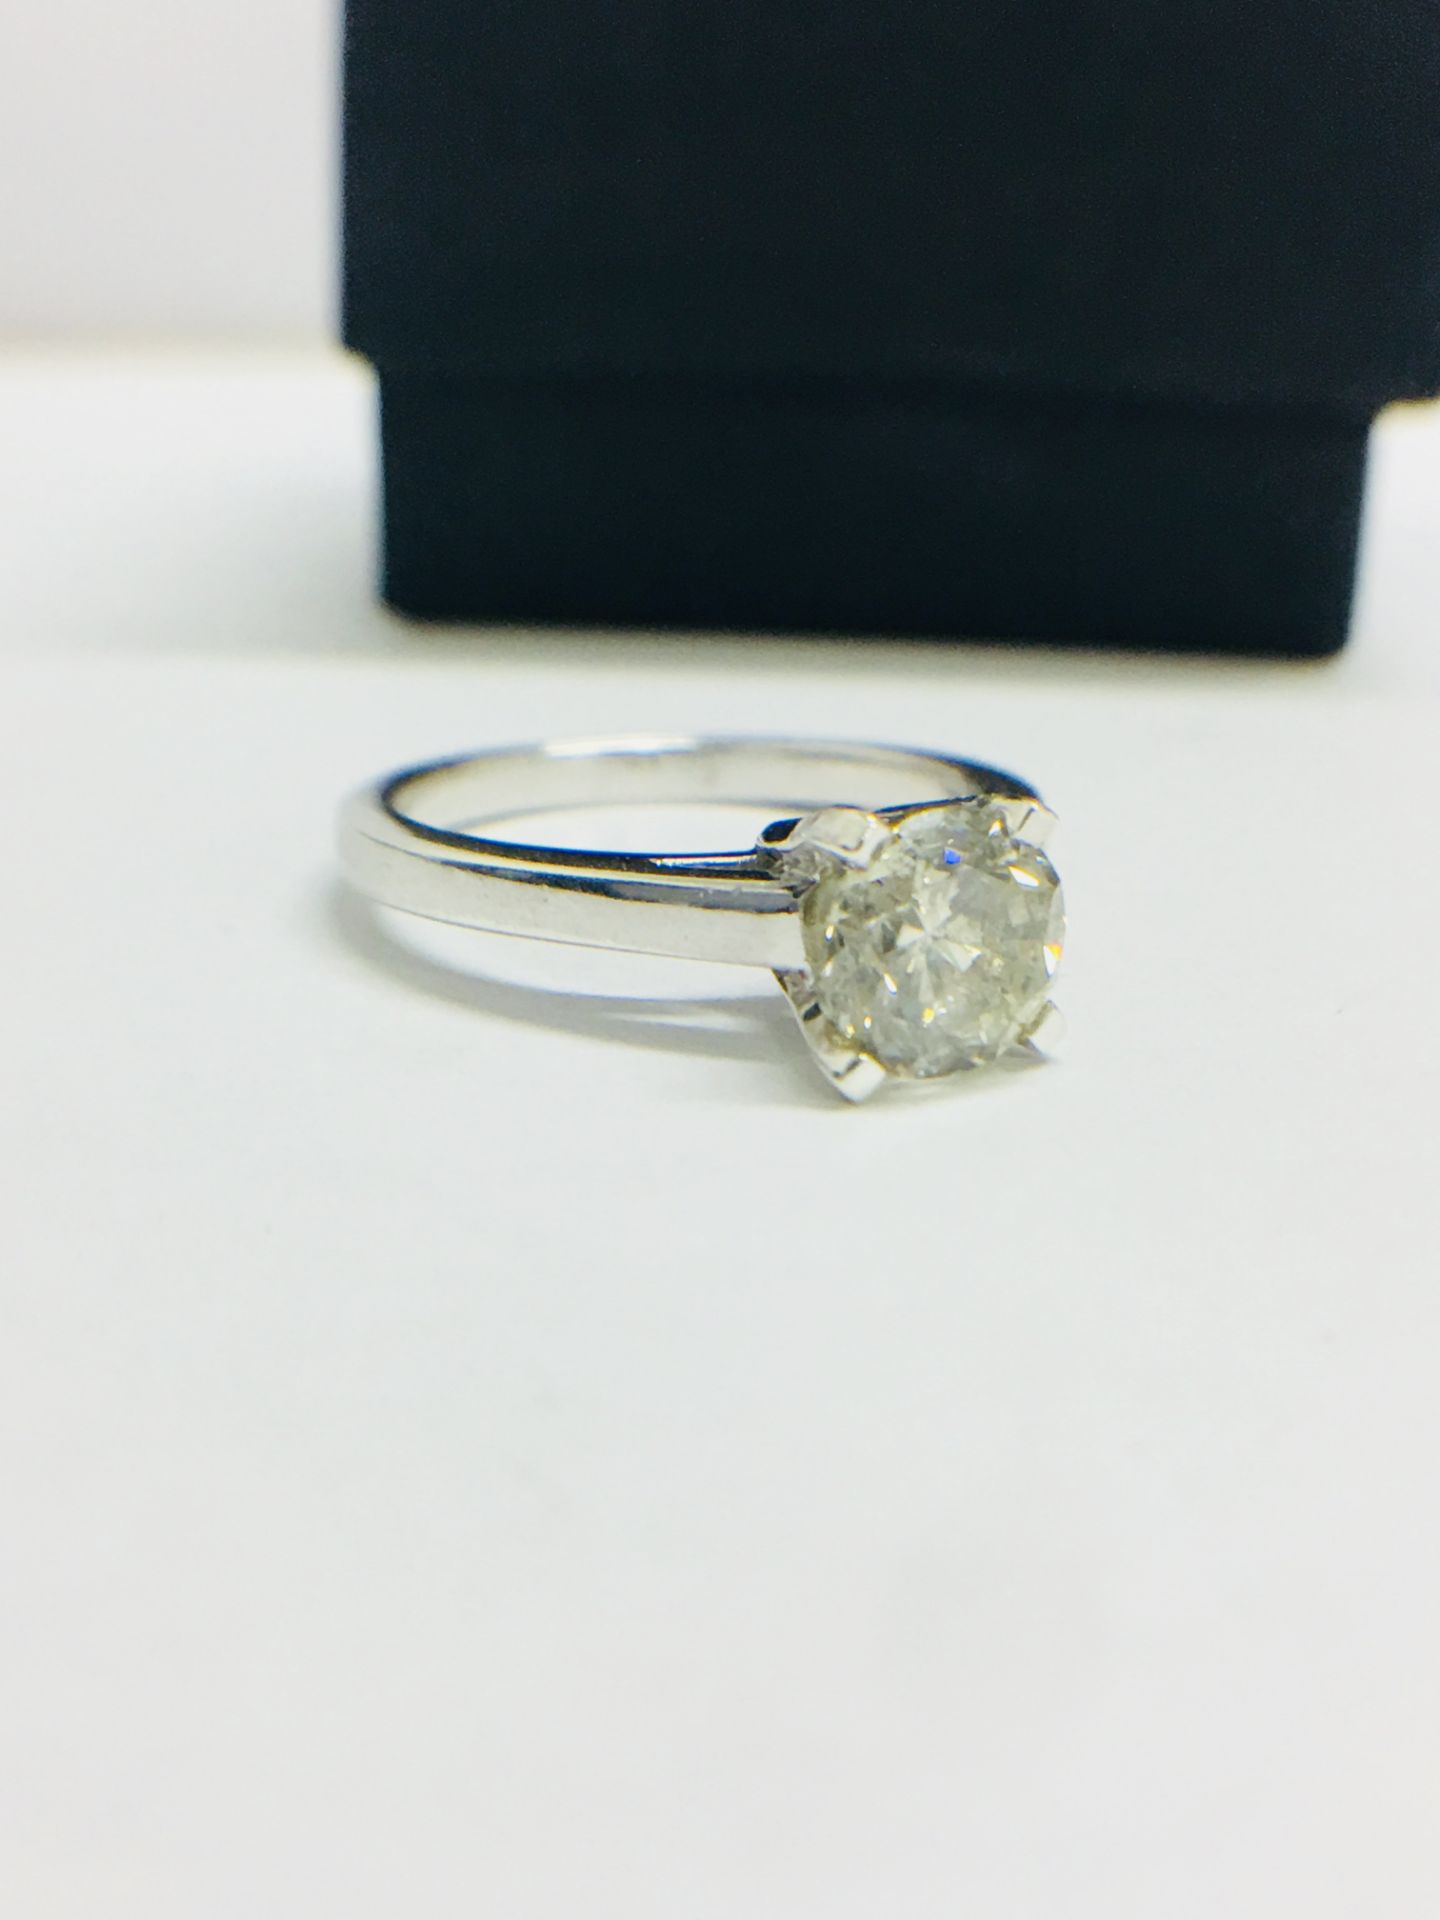 1.23ct diamond solitaire ring with a brilliant cut diamond. J colour and i1 clarity. Set in platinum - Image 8 of 8